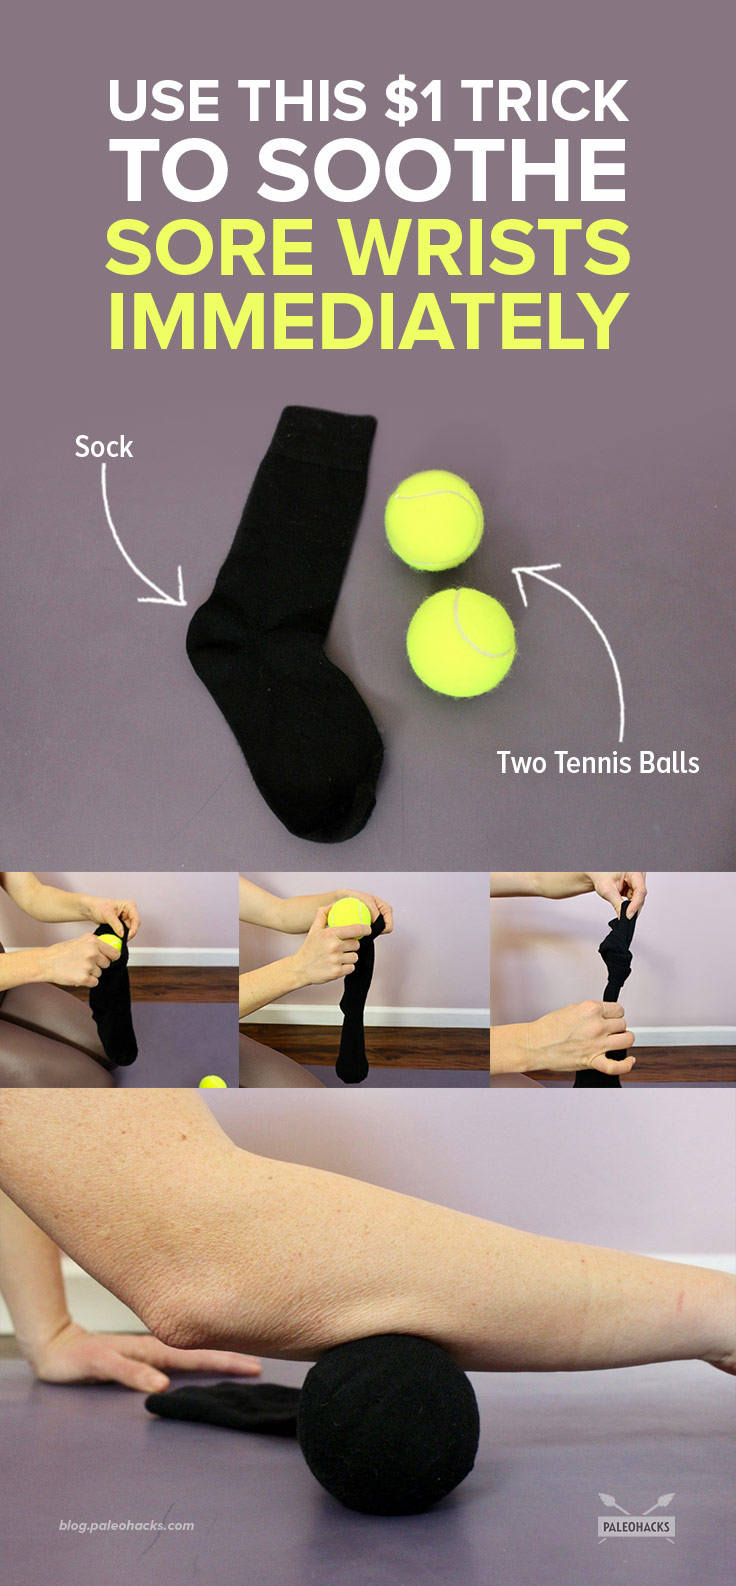 Take a break from typing and try this easy trick to ease wrist pain. All you need are two tennis balls and a sock!